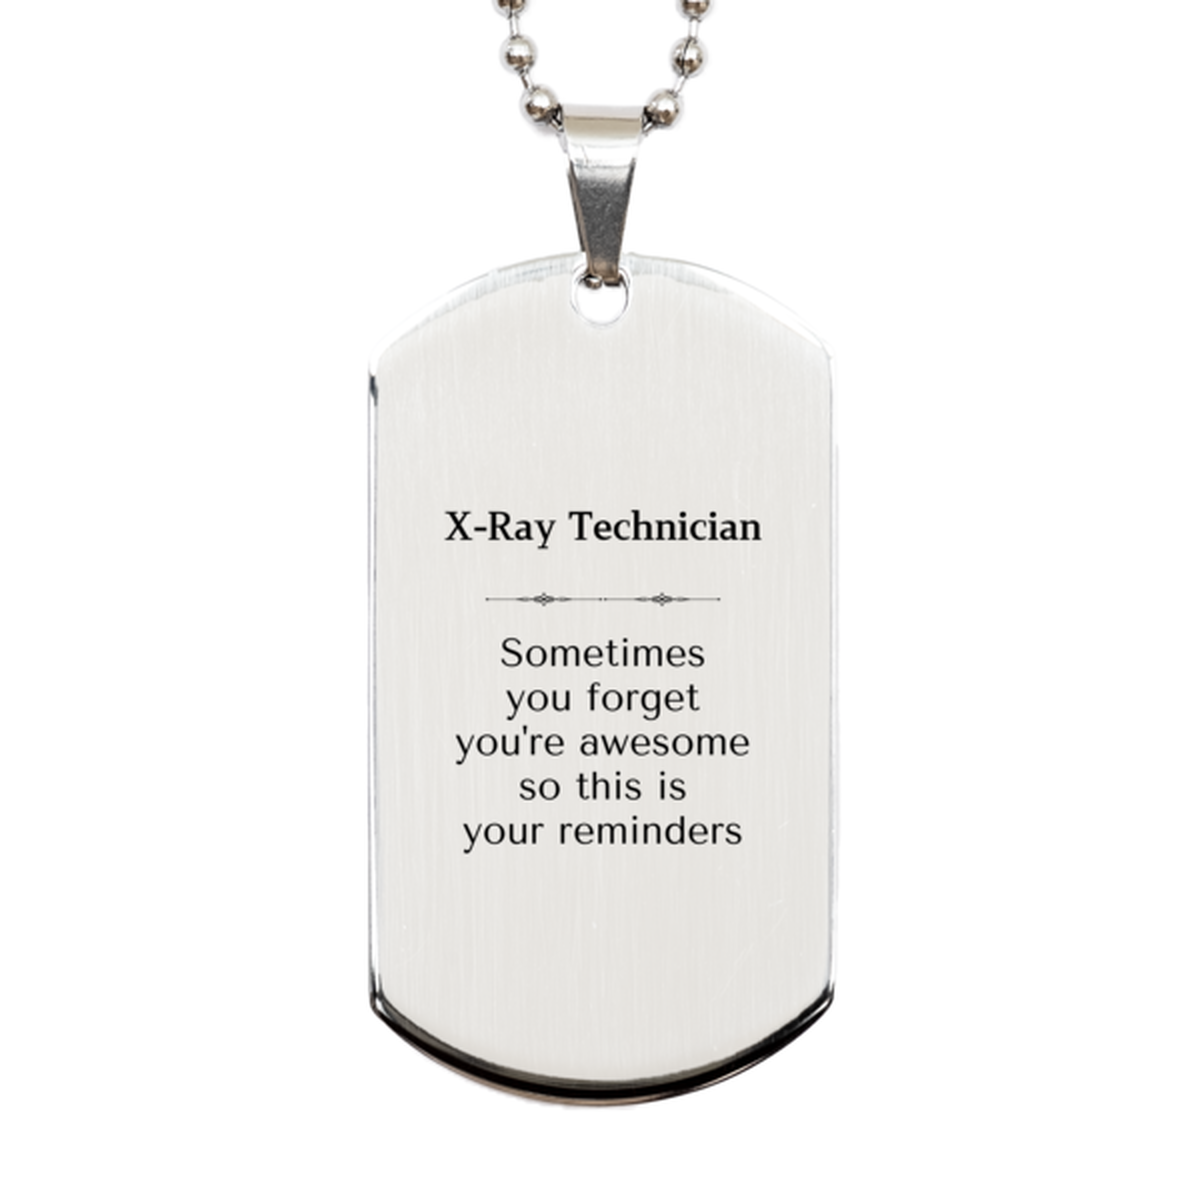 Sentimental X-Ray Technician Silver Dog Tag, X-Ray Technician Sometimes you forget you're awesome so this is your reminders, Graduation Christmas Birthday Gifts for X-Ray Technician, Men, Women, Coworkers